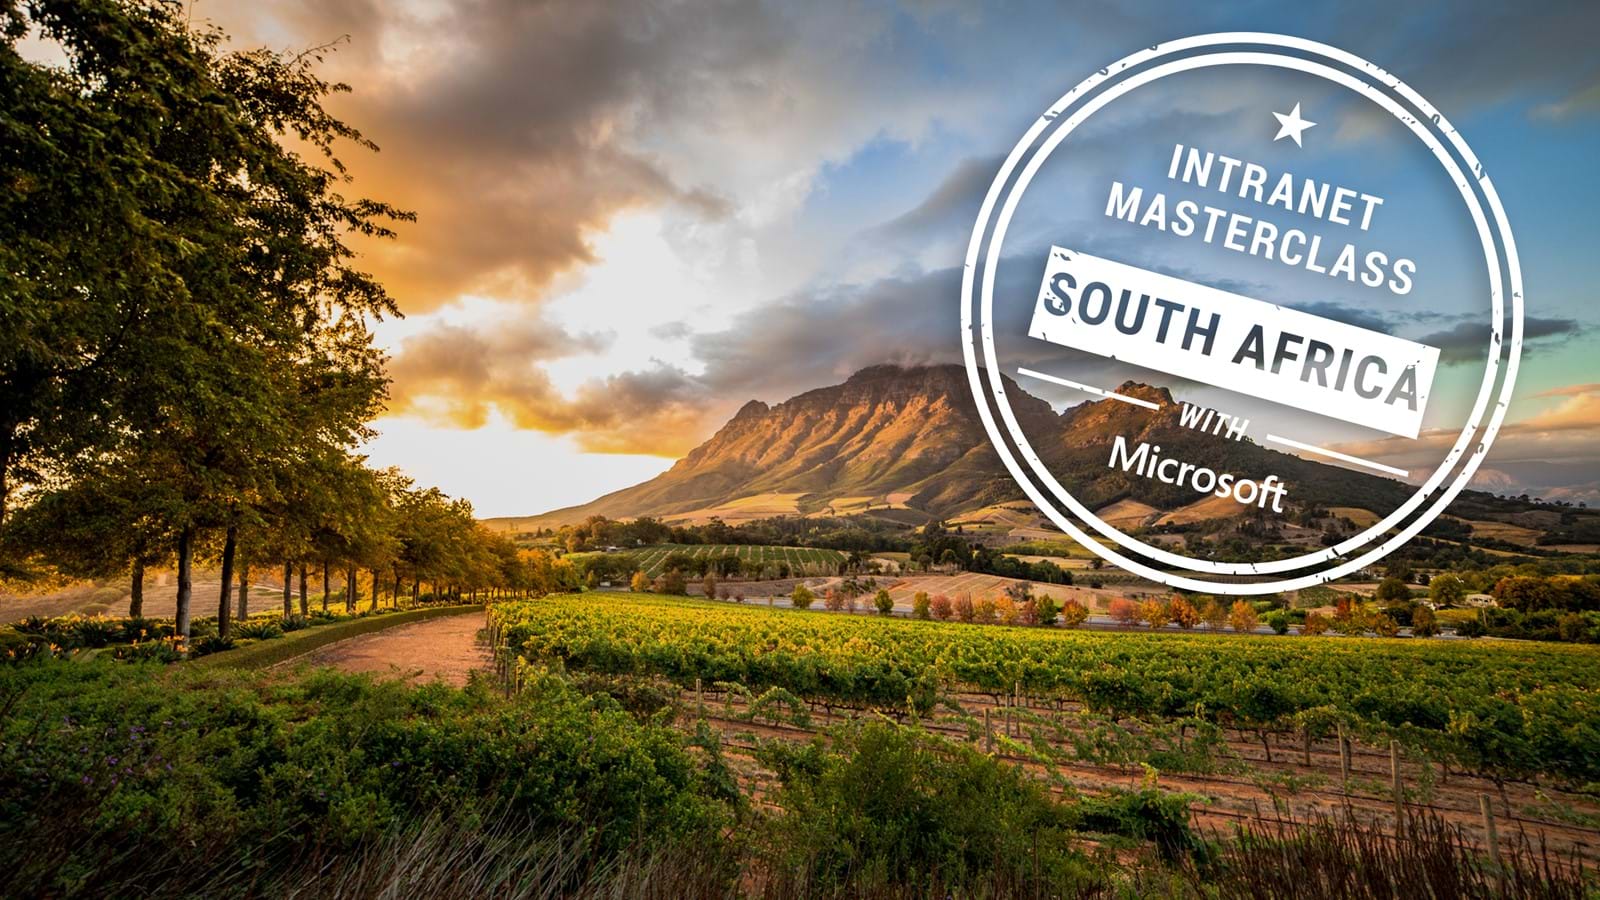 Supercharging employee experience with an intranet event in South Africa